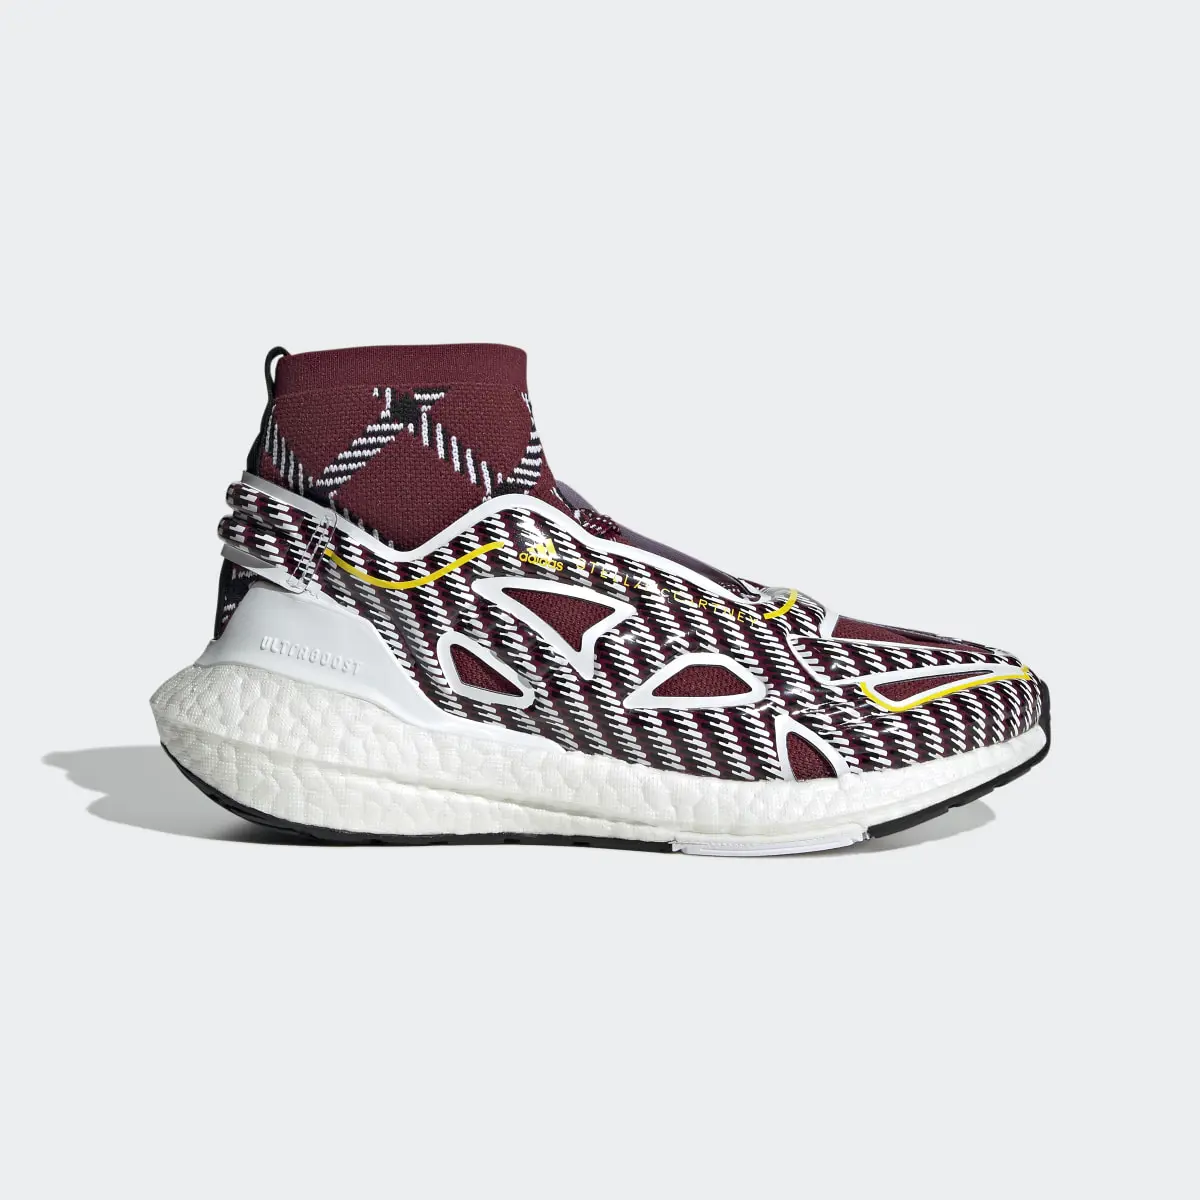 Adidas by Stella McCartney Ultraboost 22 Elevated Shoes. 2